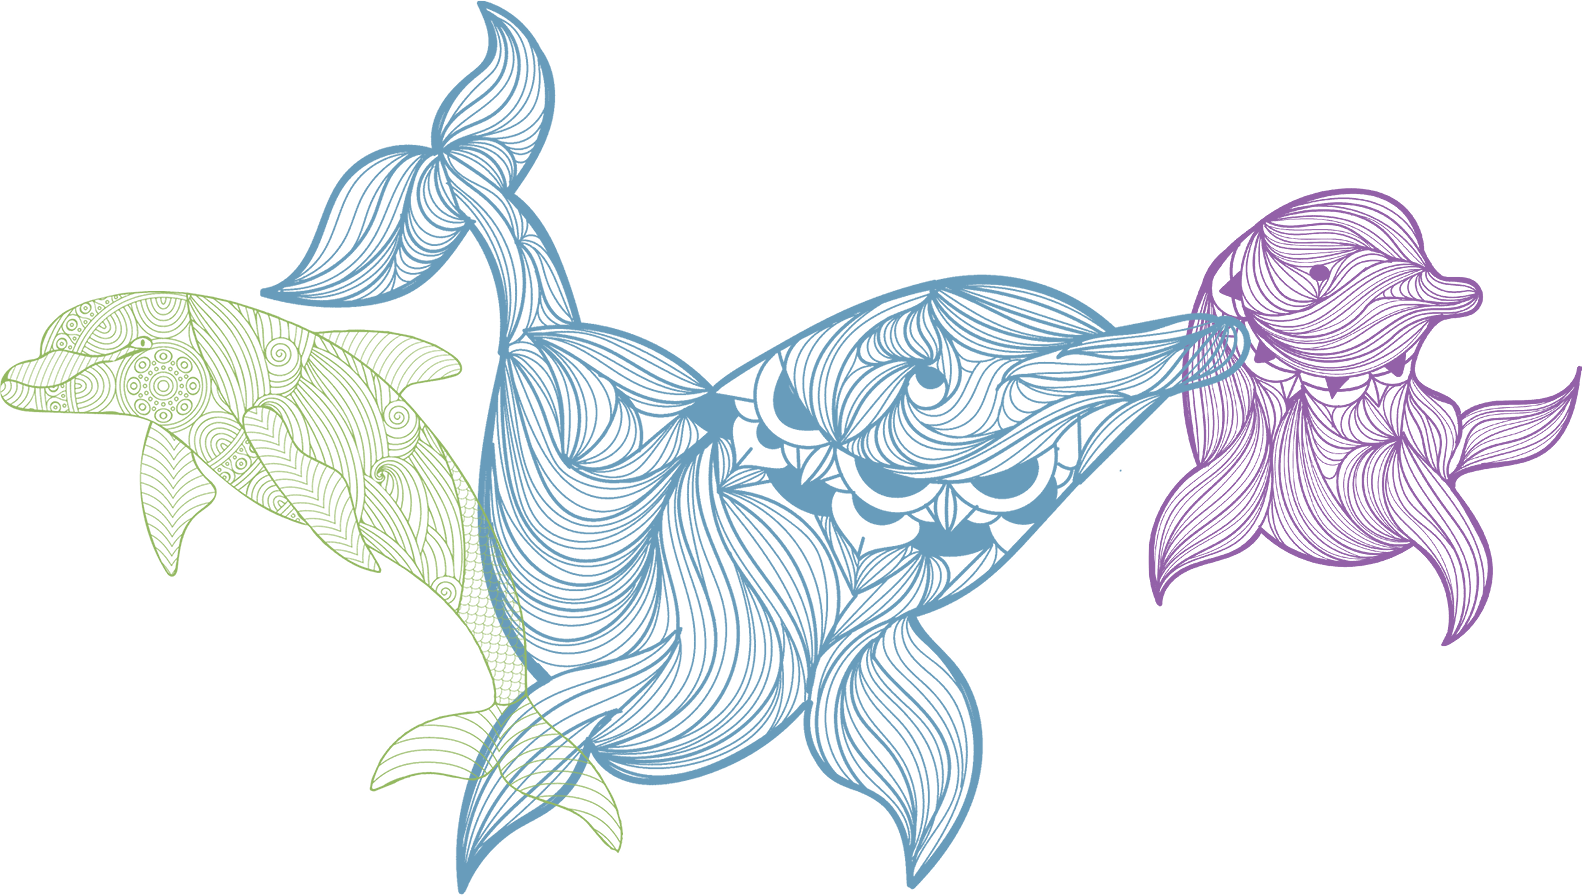 Dolphins in Colorful Mandala Style Artwork on a Granite Bay Graphic Design Microsite